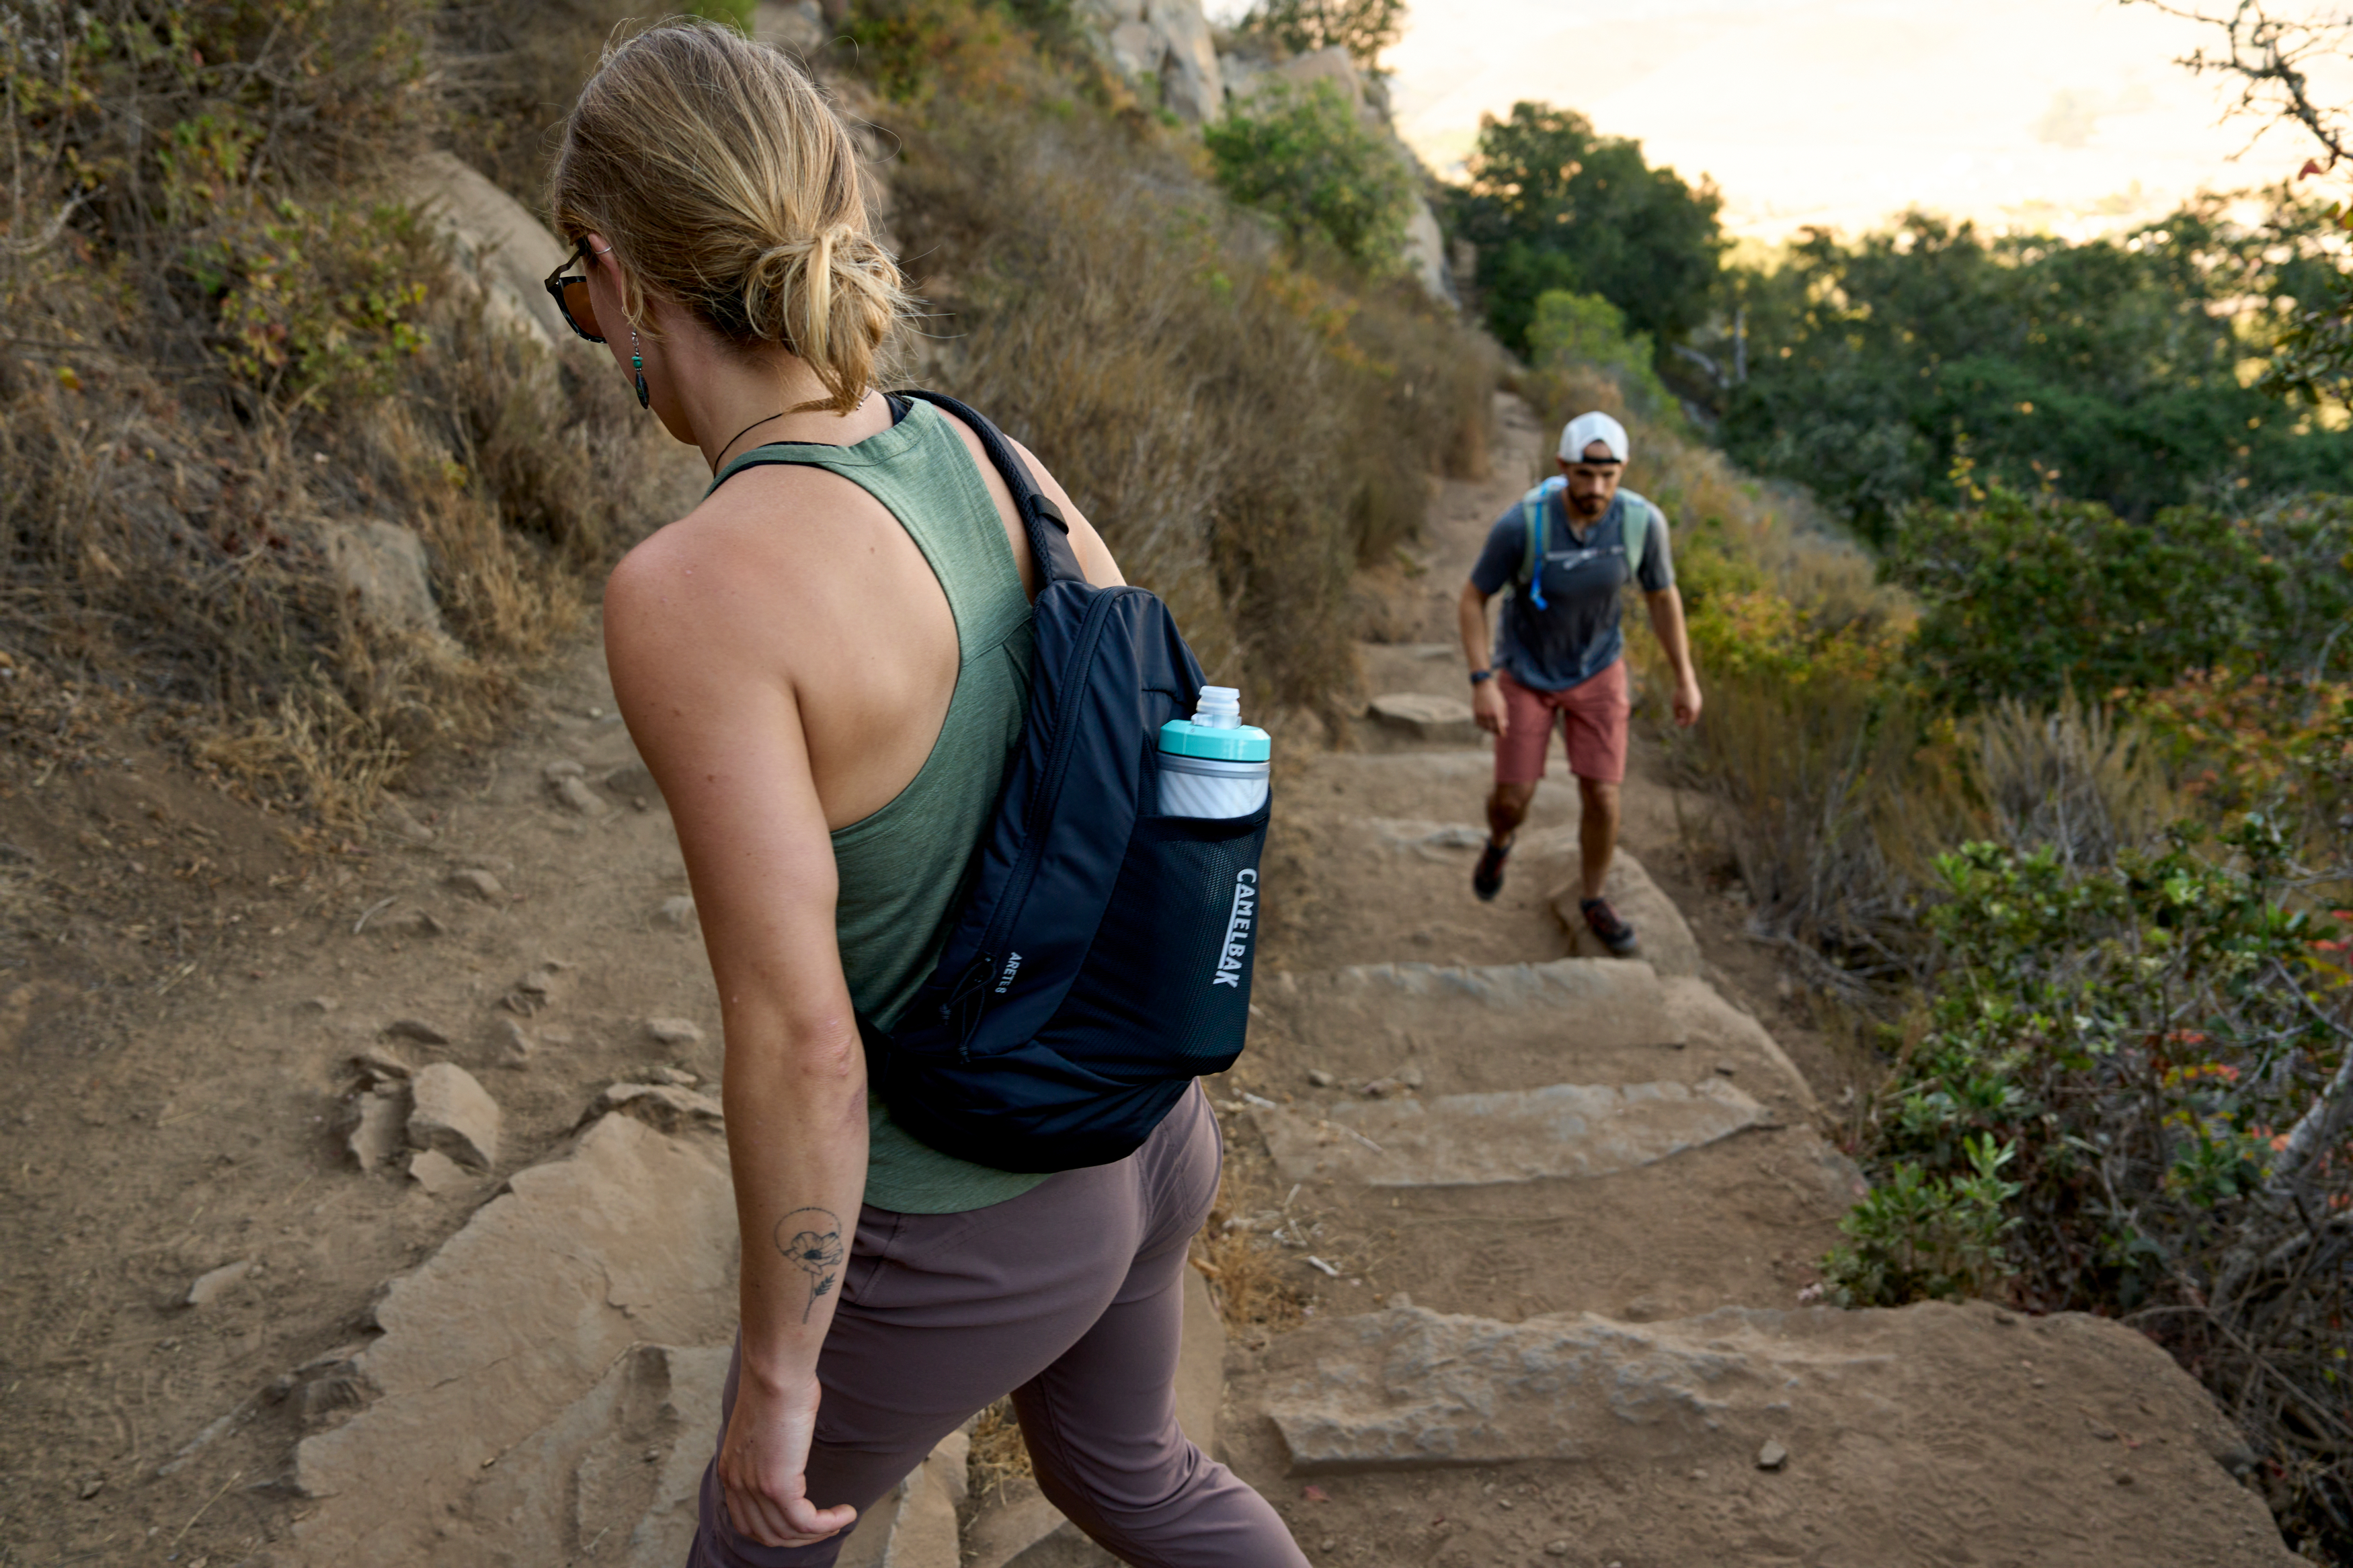 Save Up to 50% During the CamelBak Cyber Sale